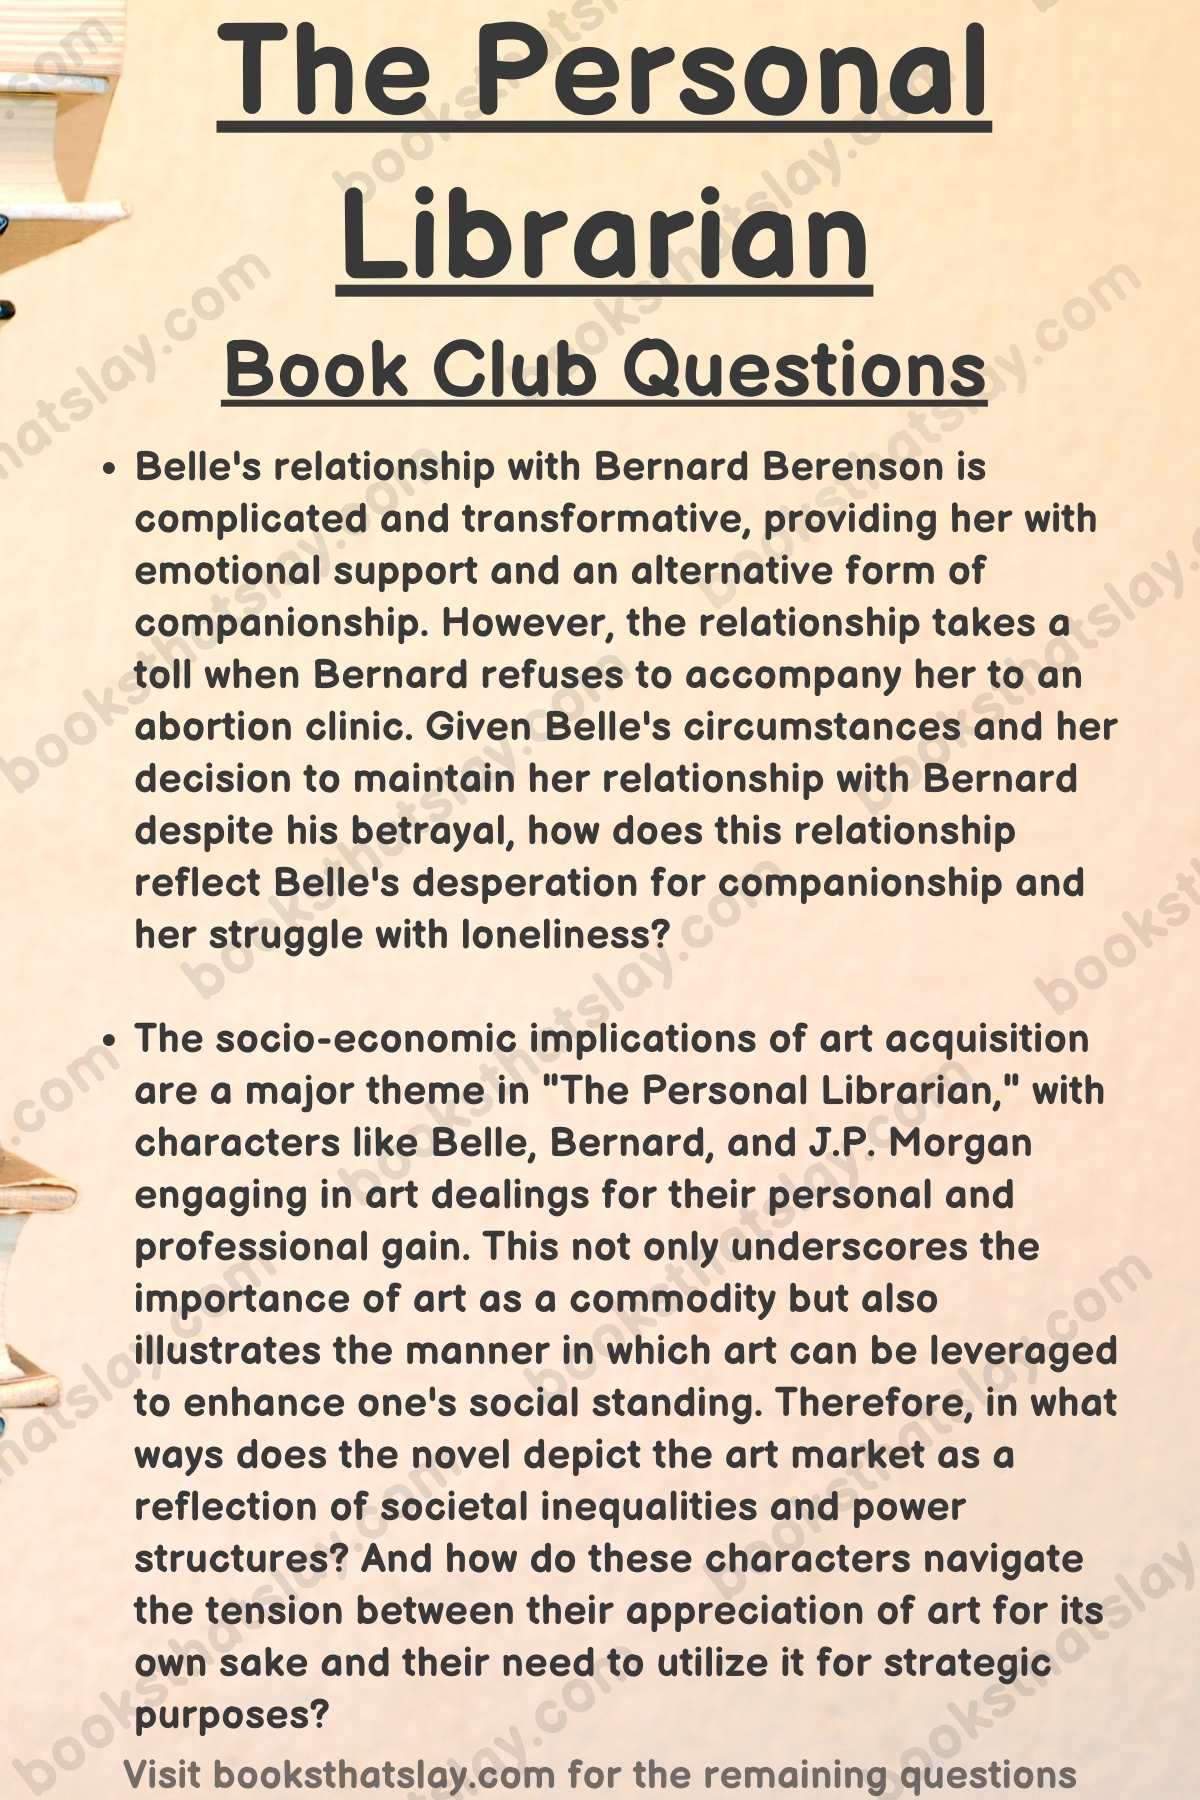 The Personal Librarian Book Club Questions Infographic